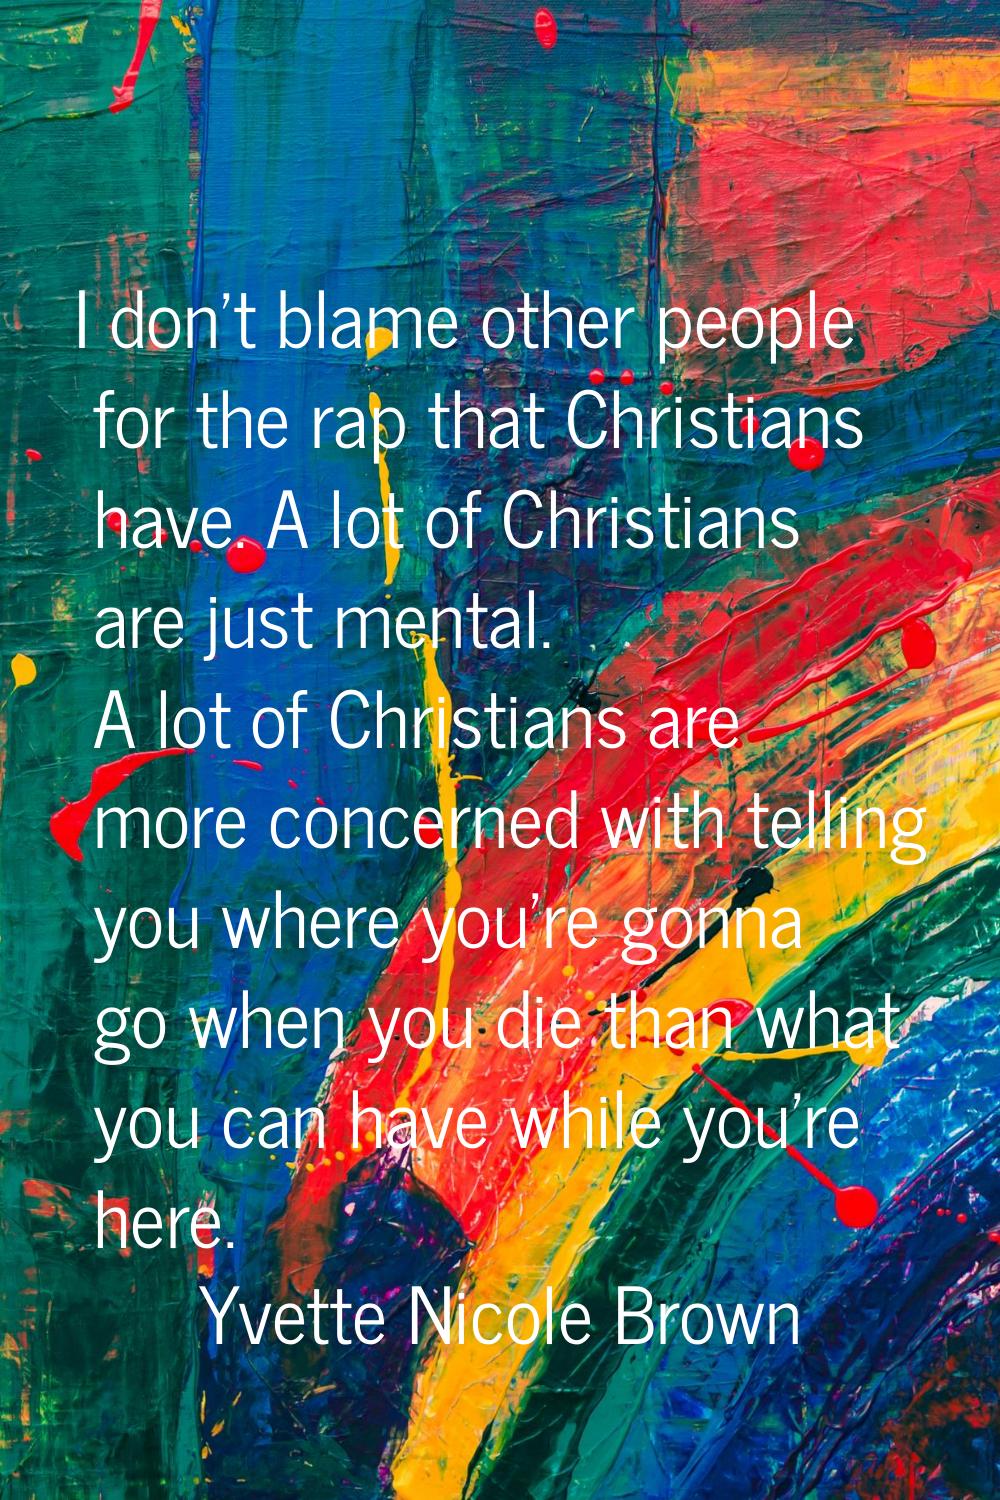 I don't blame other people for the rap that Christians have. A lot of Christians are just mental. A